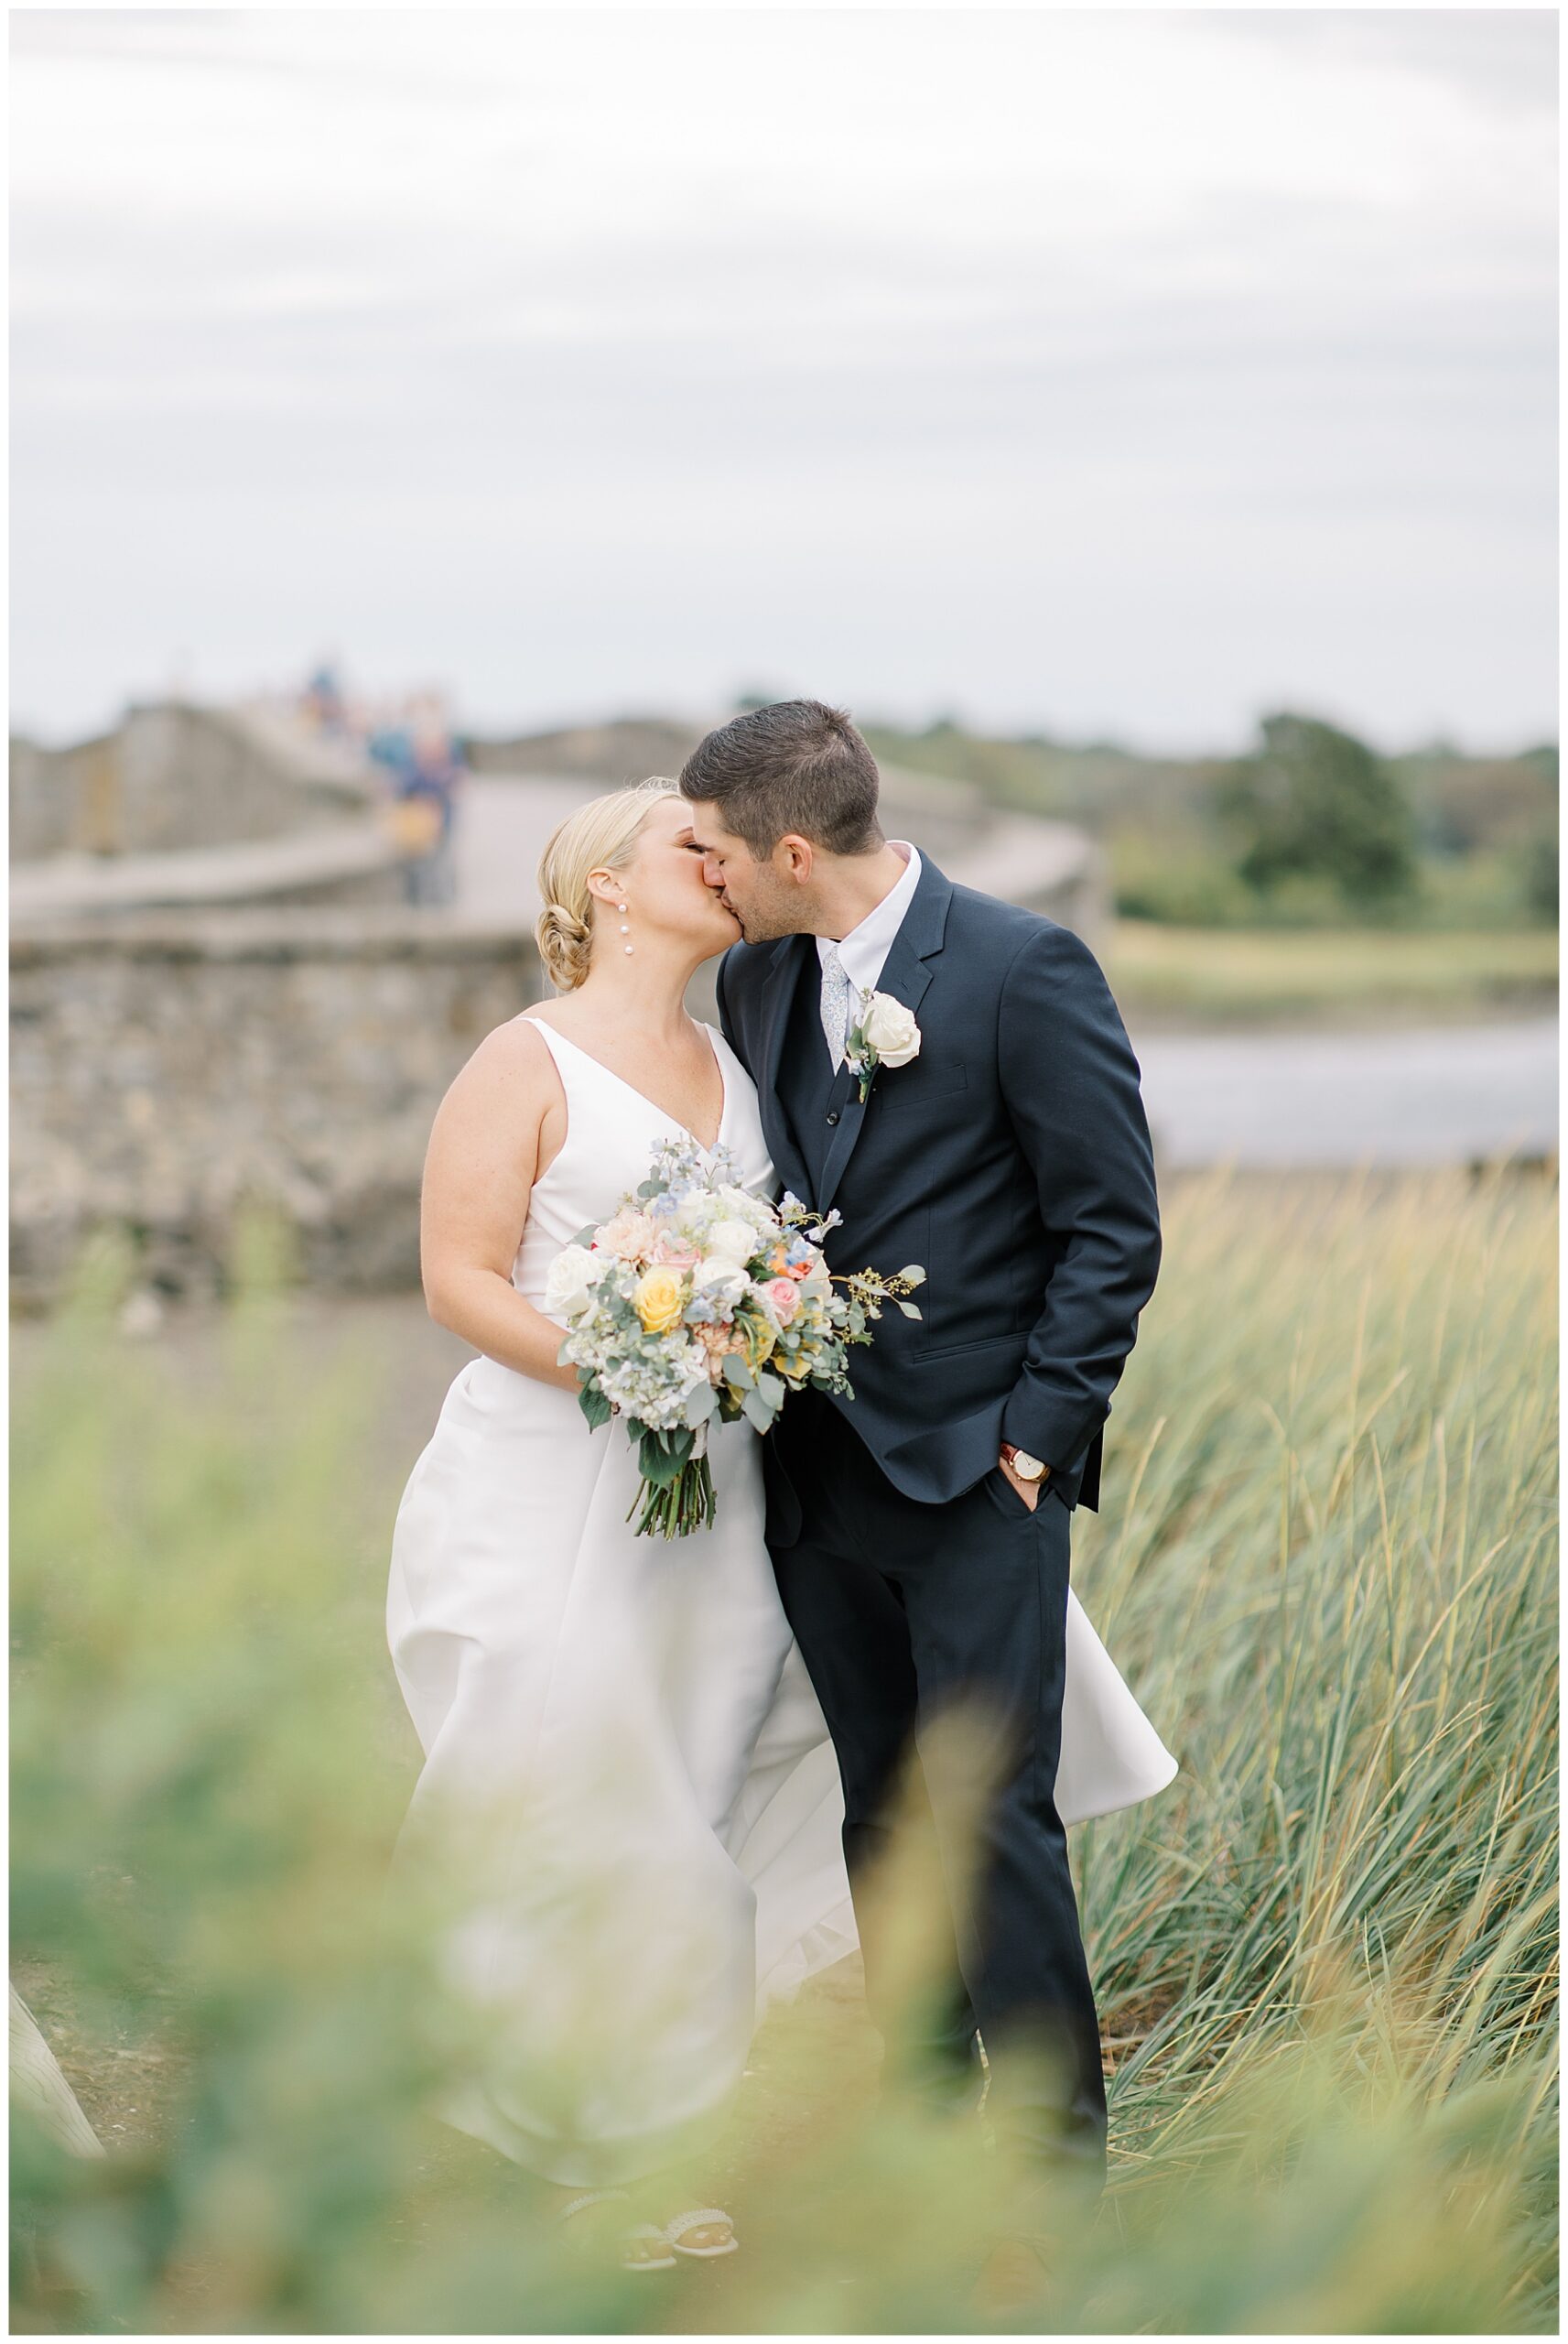 romantic wedding portraits in the tall grass